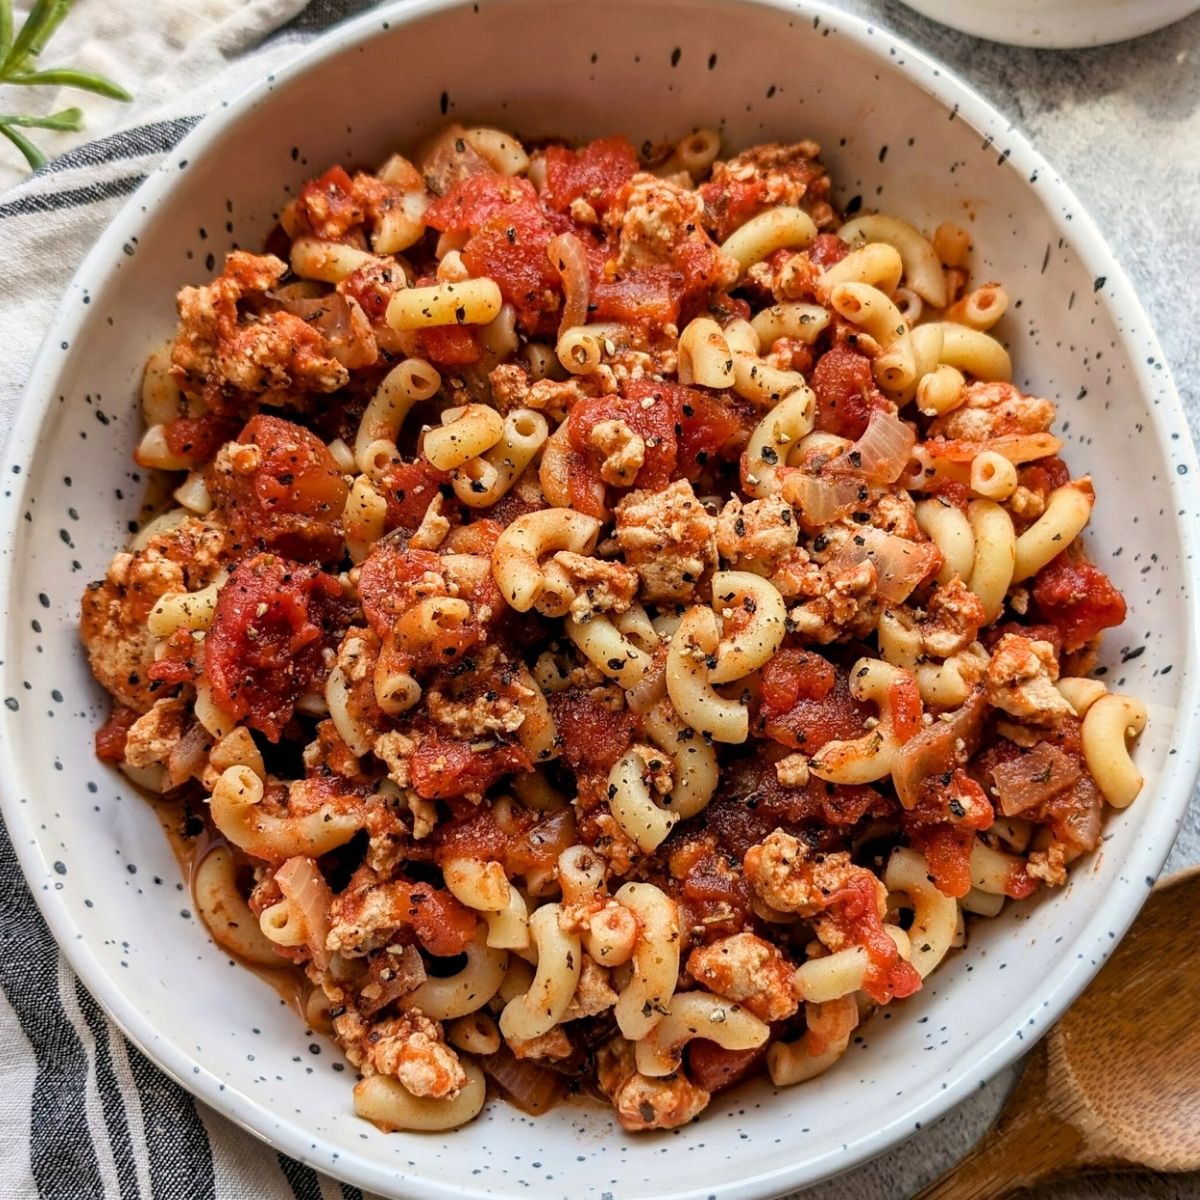 american goulash with no salt added dinner ideas with tomatoes and noodles with ground meat